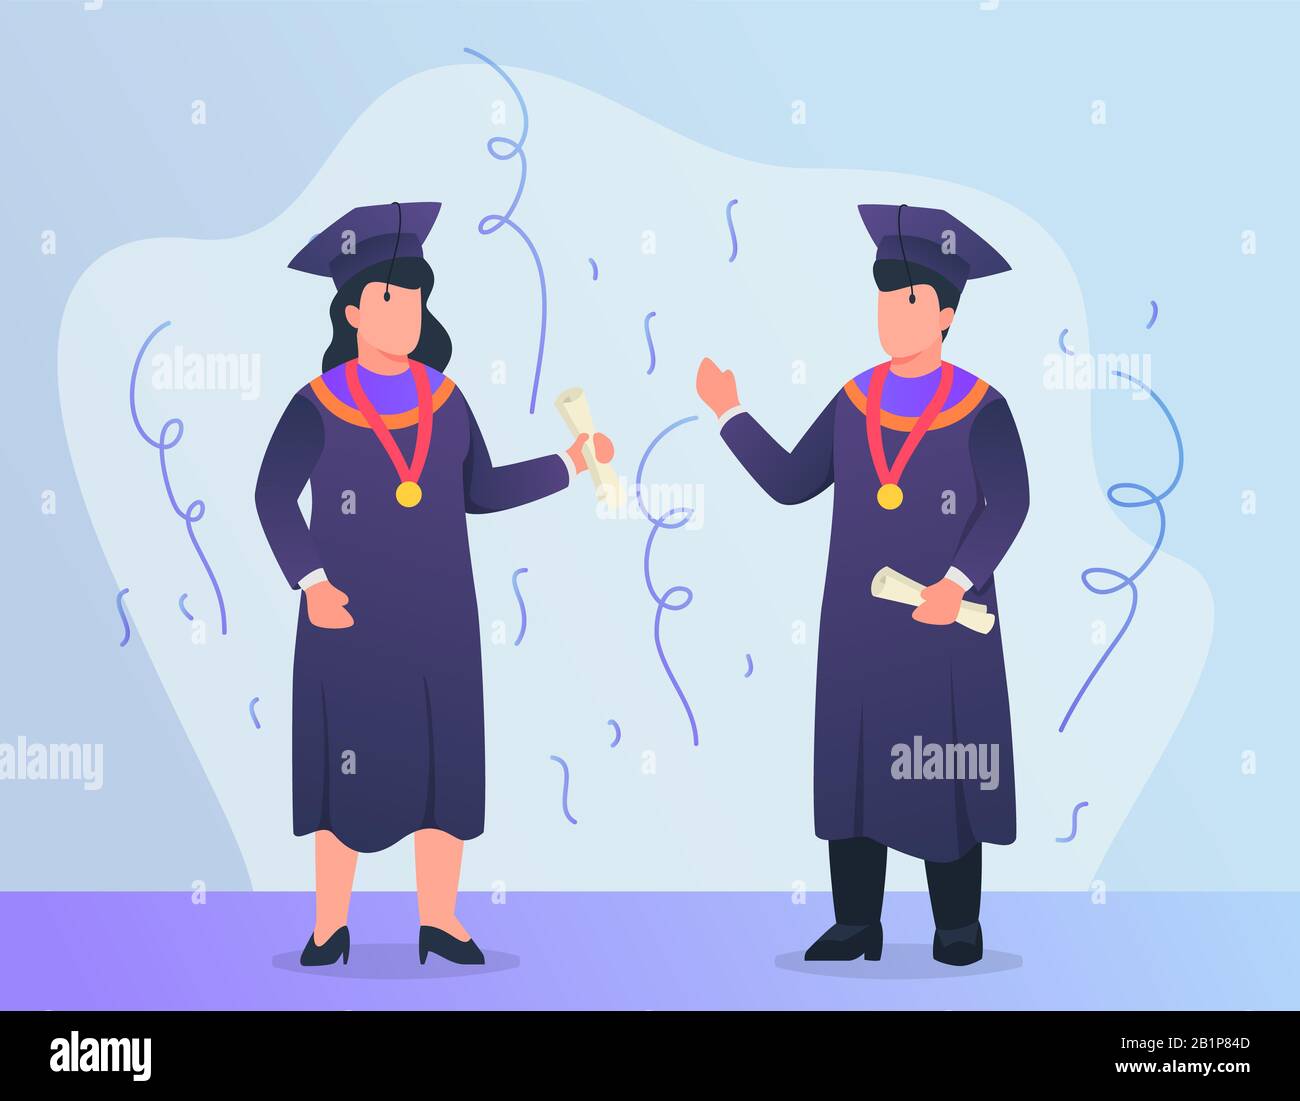 man and woman celebrate graduation procession using hat and suit vector Stock Photo